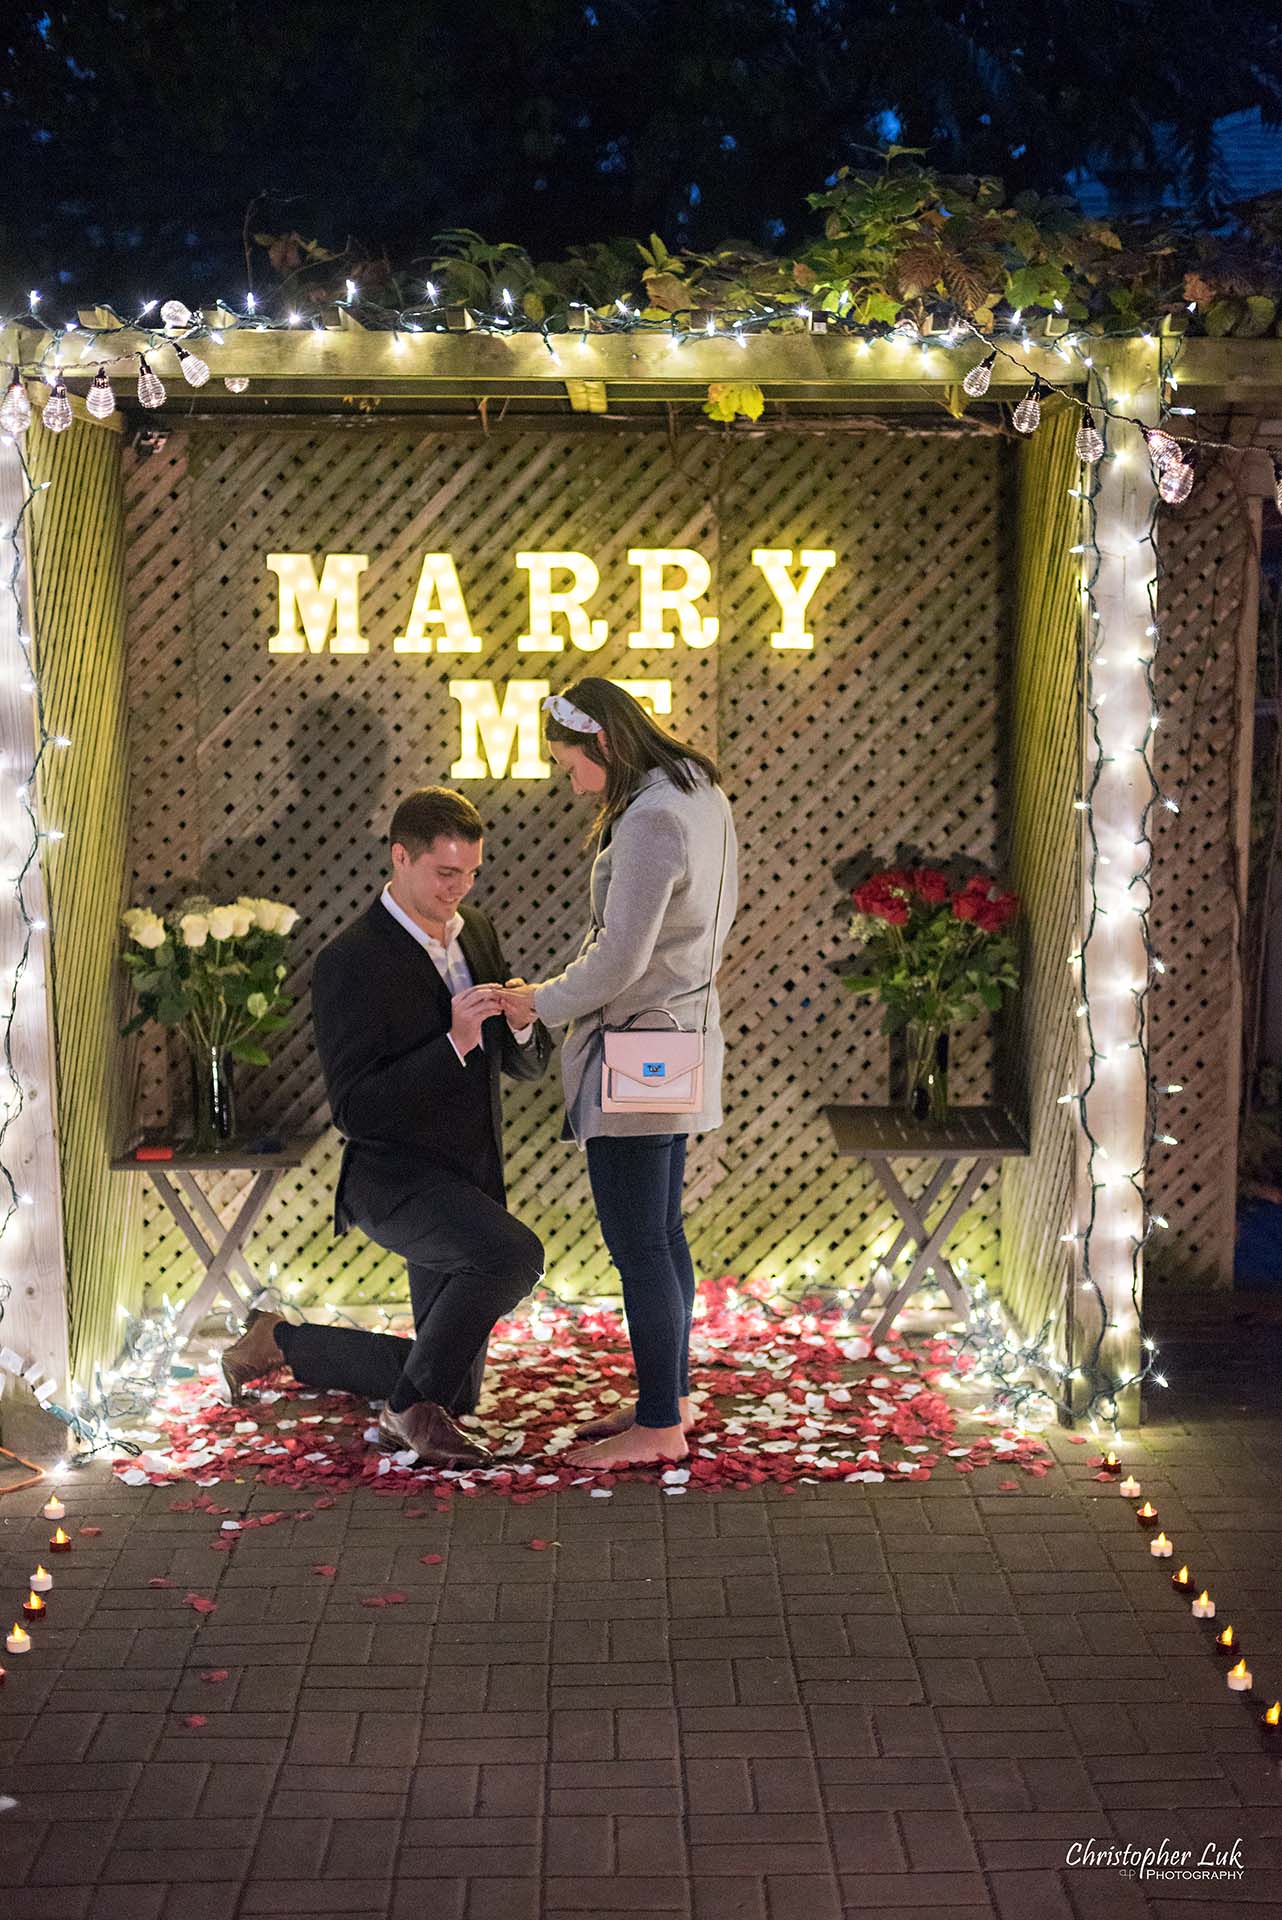 Christopher Luk Toronto Wedding Photographer - Backyard Surprise Proposal Engaged Engagement Gazebo Christmas Fairy Twinkle Lights Flower Petals Marry Me - Bride and Groom Natural Candid Photojournalistic Down on One Knee Diamond Ring Finger